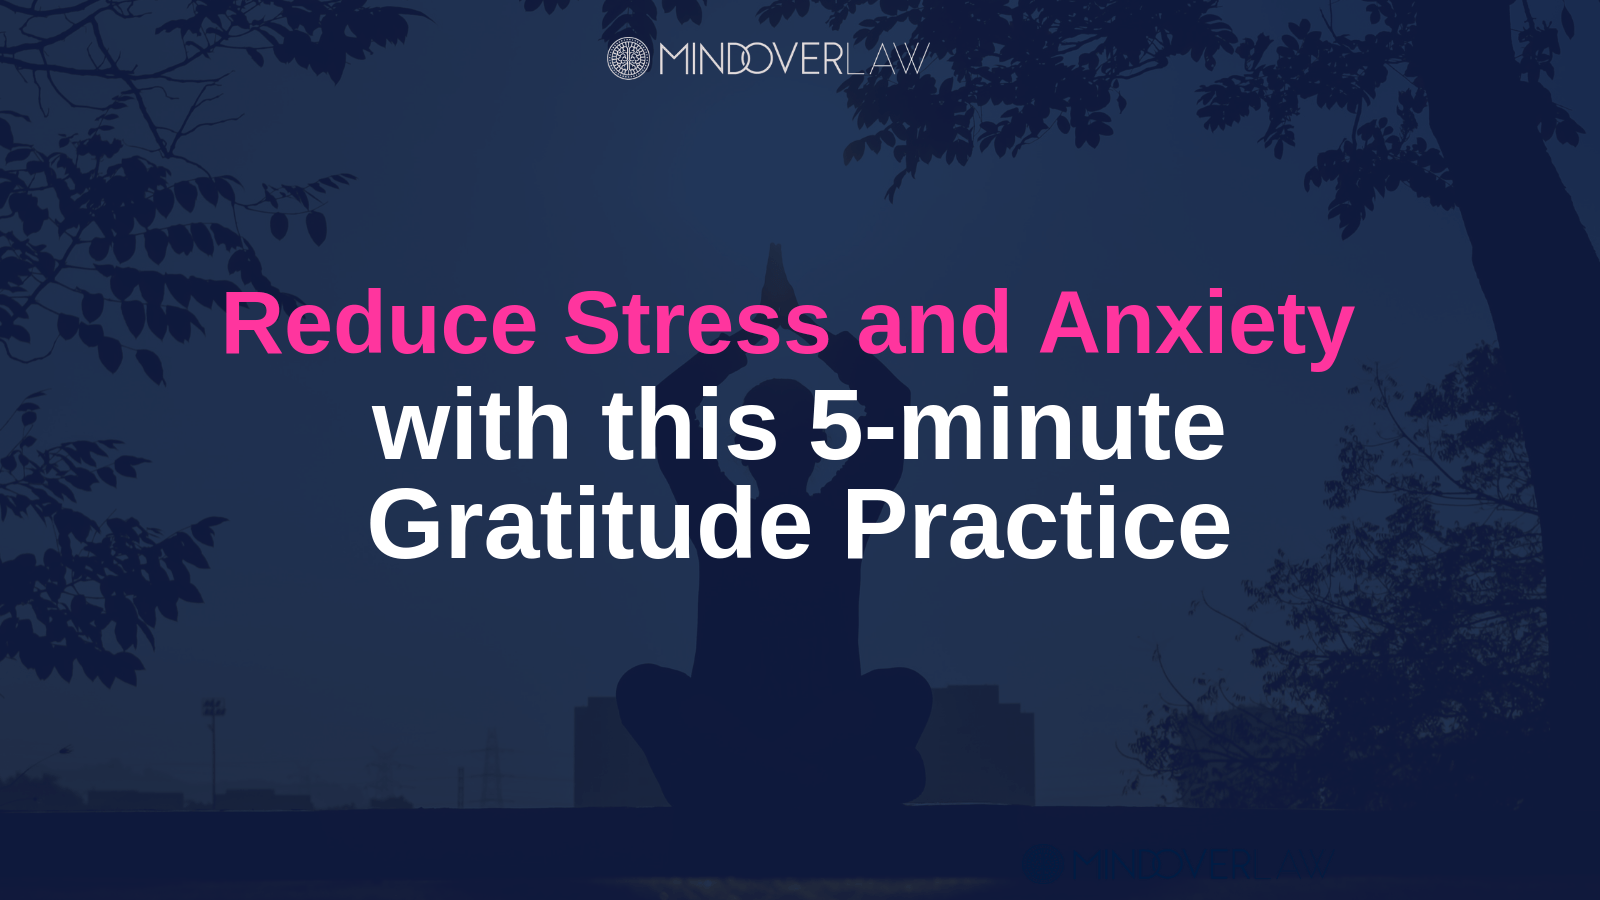 Reduce Stress and Anxiety with this 5-minute Gratitude Practice - mind over law